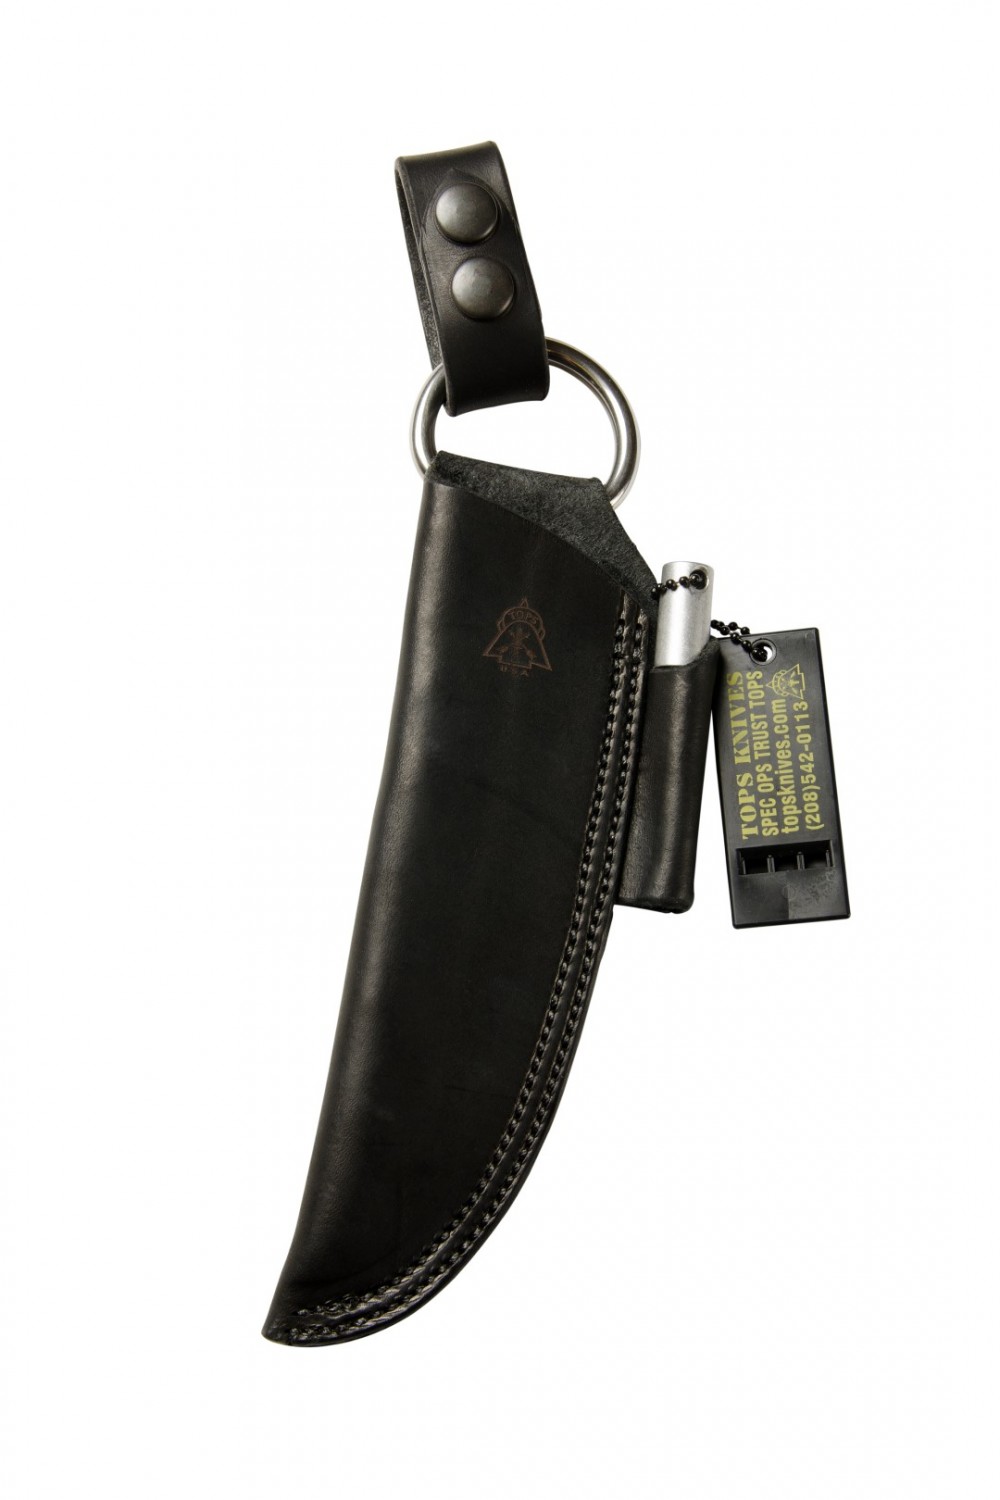 Small Leather Sheath Sheath - TOPS Knives Tactical OPS USA